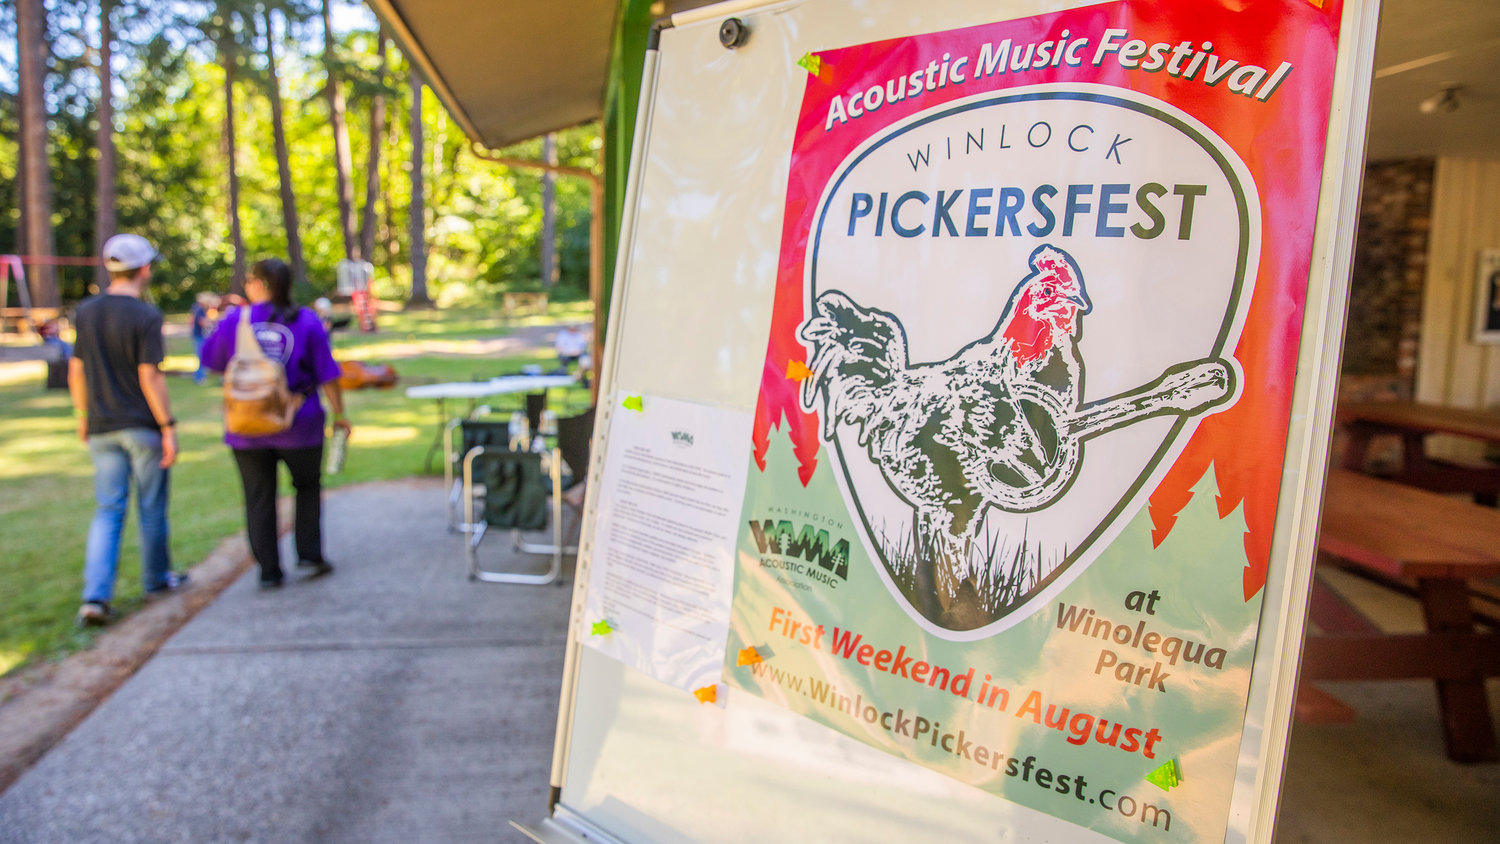 A sign for the Winlock Pickersfest is displayed Saturday morning at Winolequa Memorial Park.